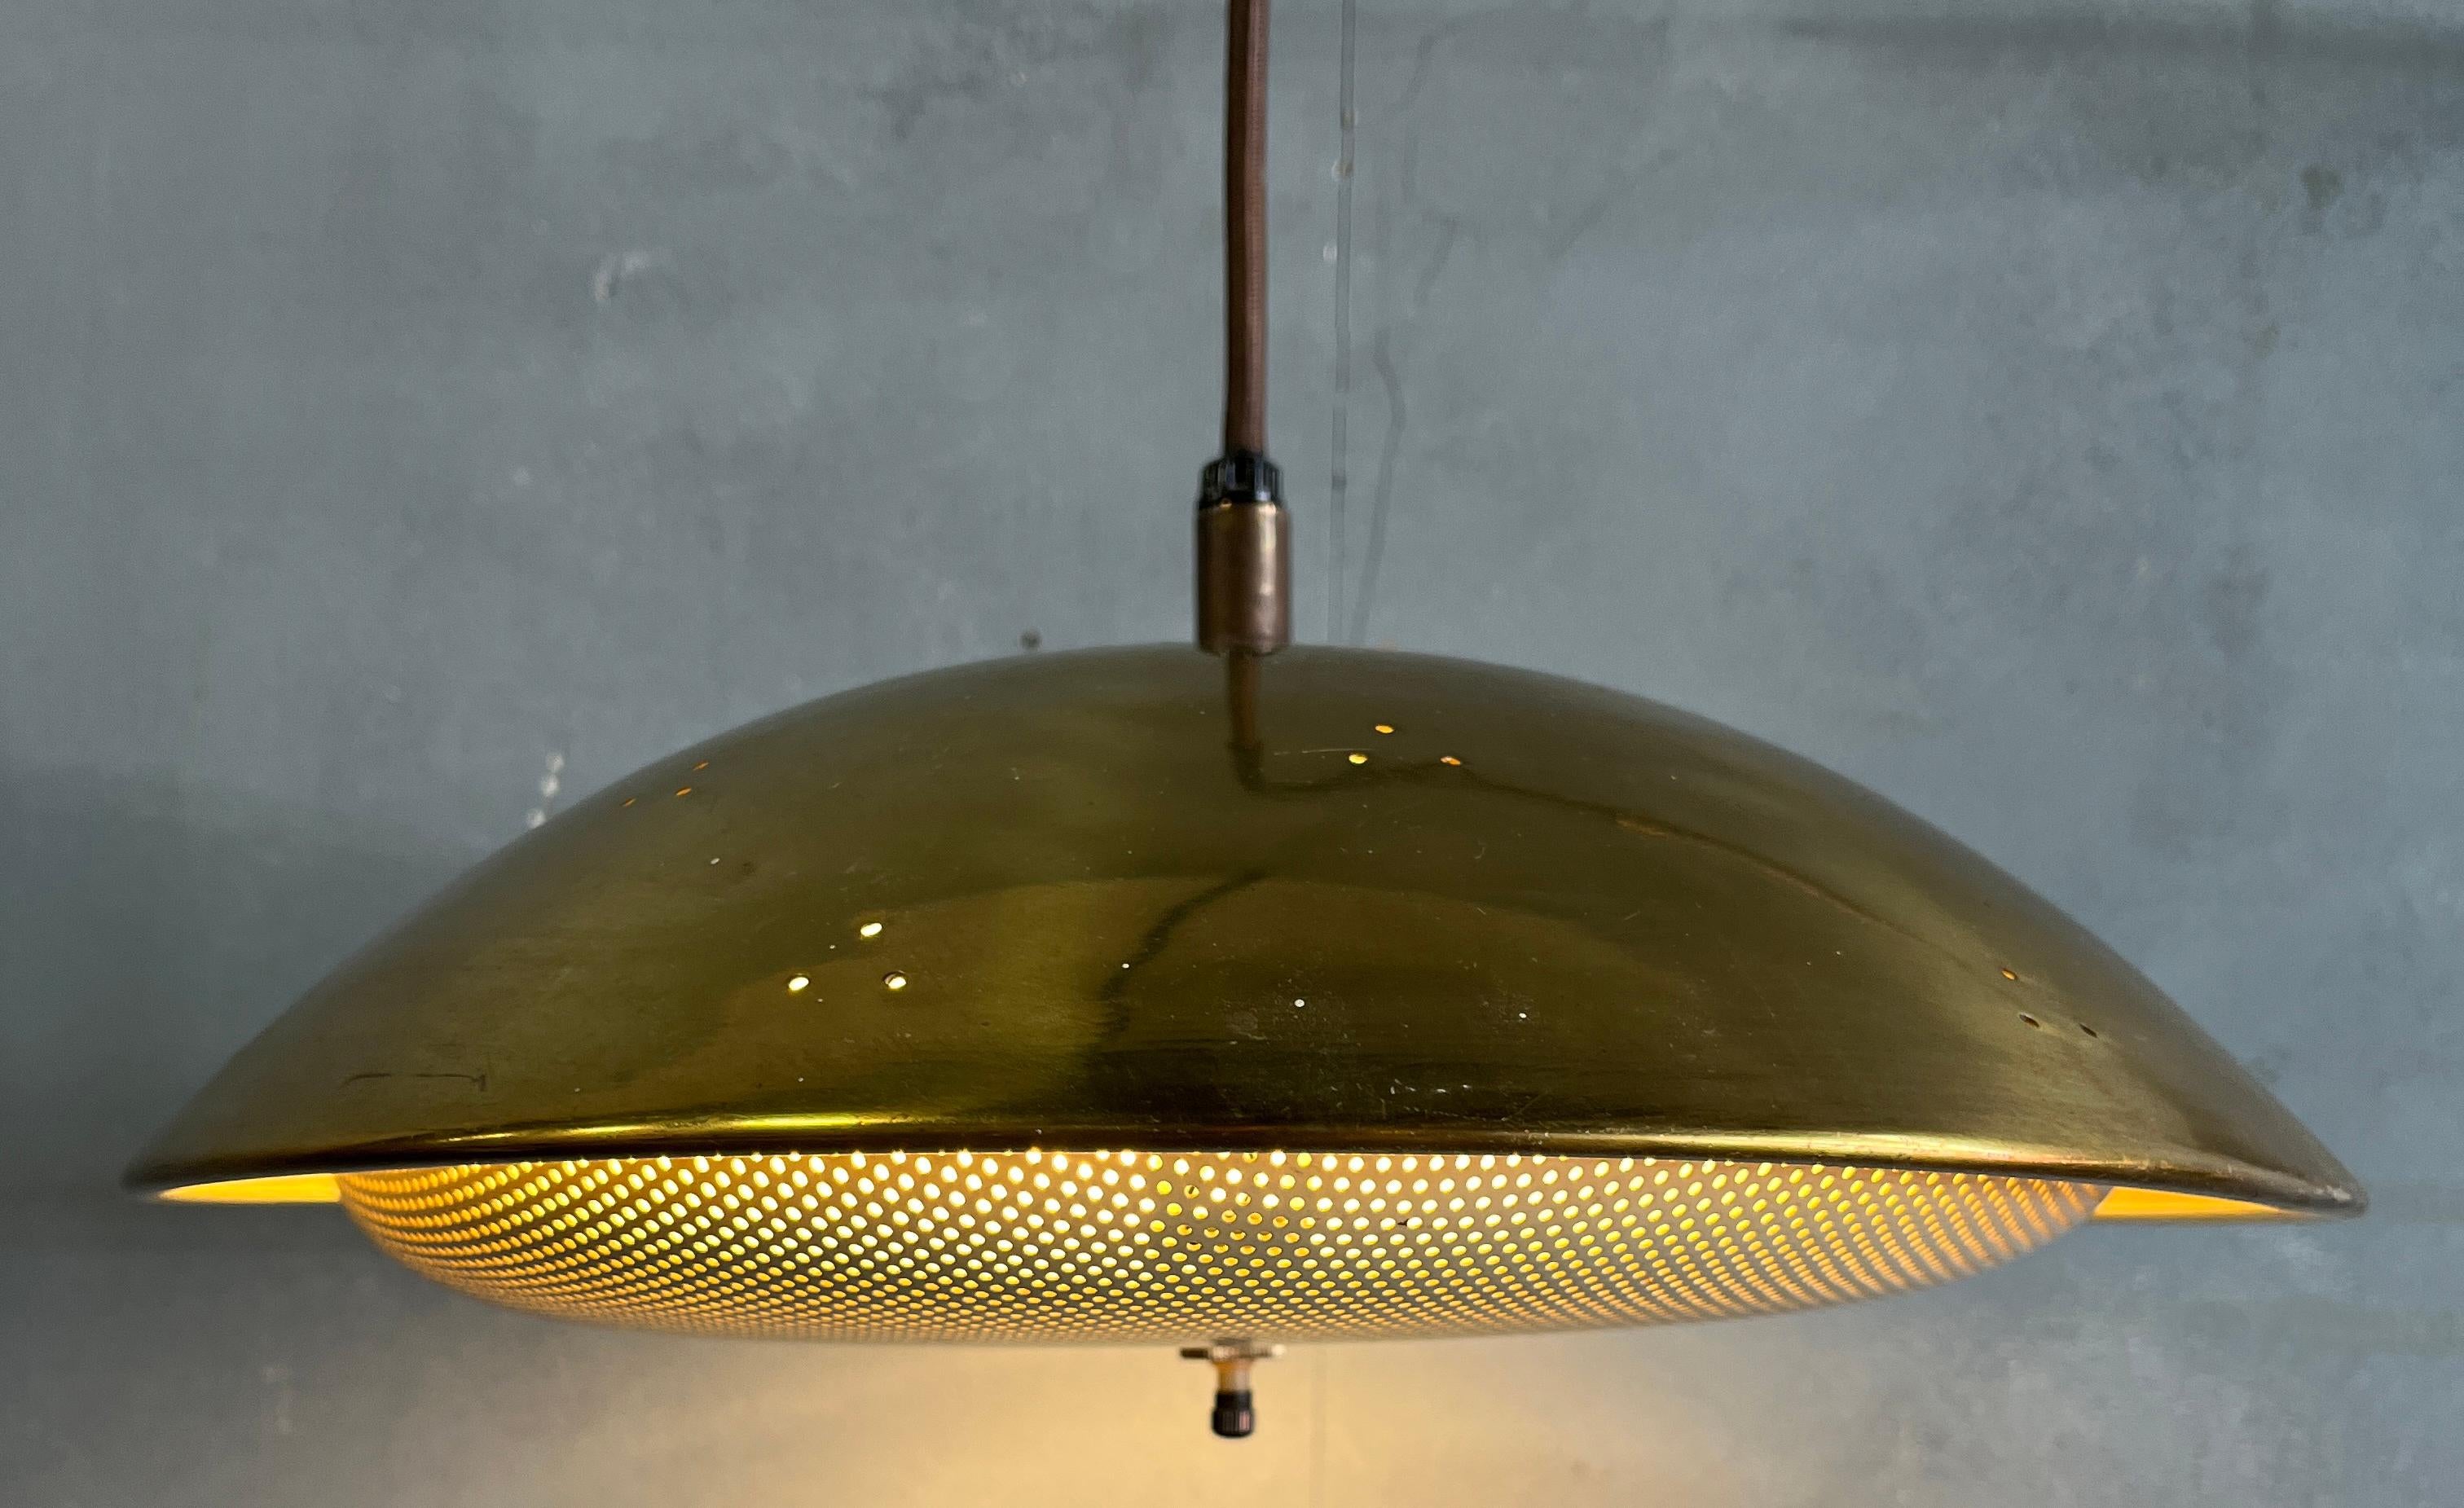 Beautiful swing arm adjustable wall lamp with brass perforated shade. Adjust from 20'' to around 29'' in width. Height can be adjusted by a counterweight on the cord.
Perfect reading lamp or accent light. 
New wiring. Body in original condition